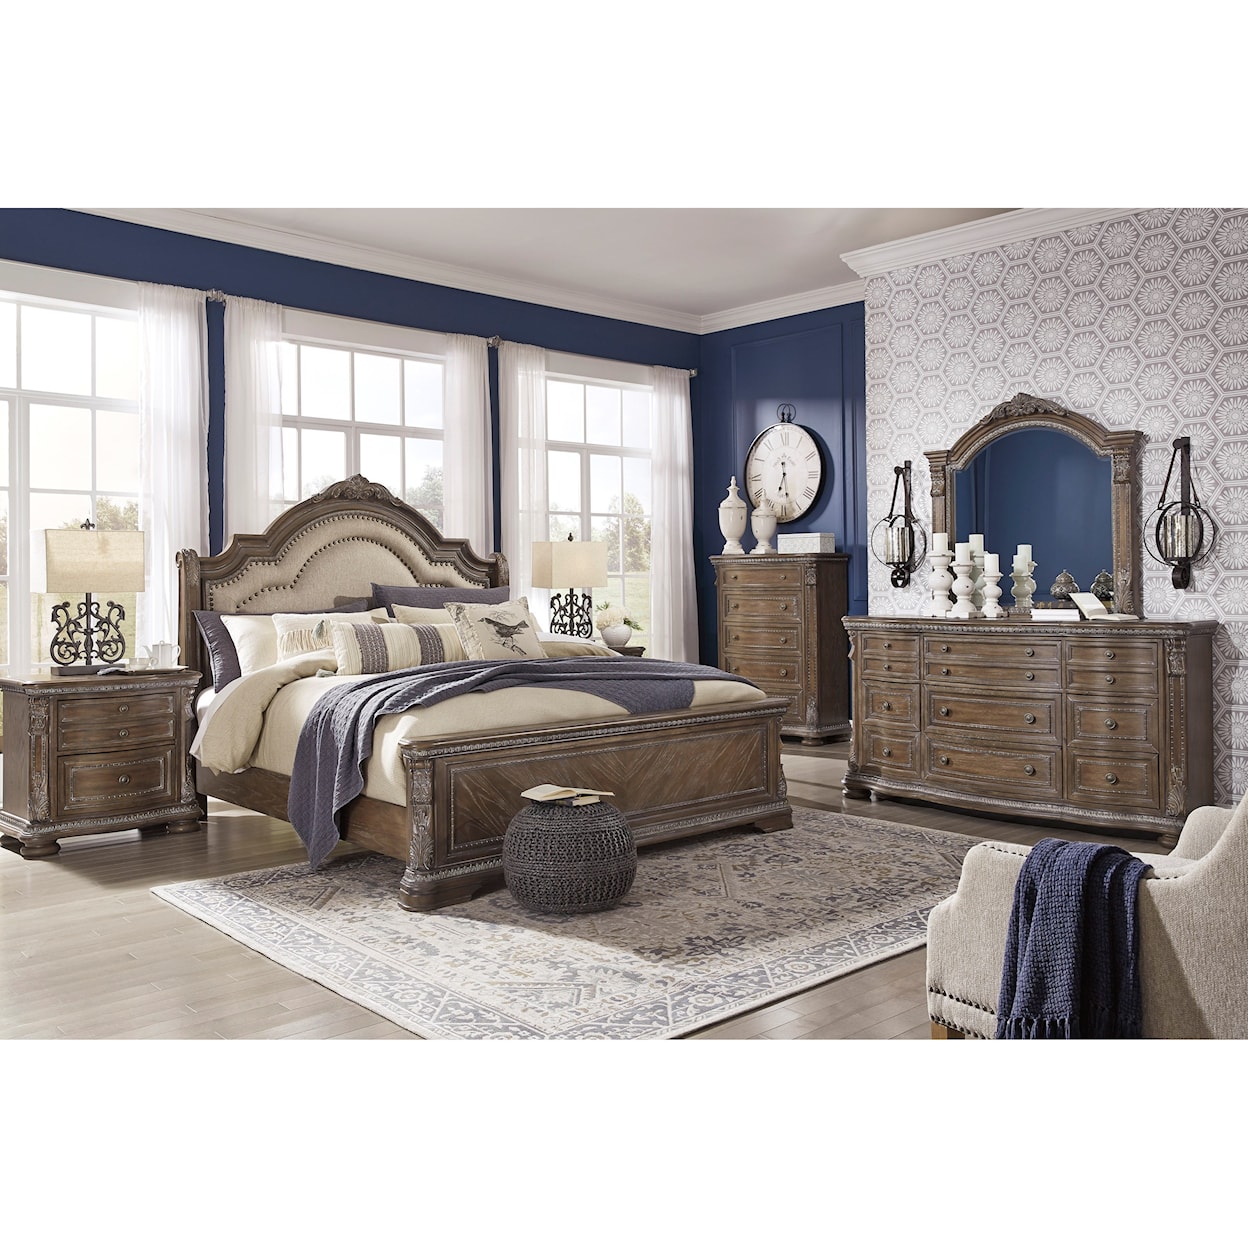 Signature Design by Ashley Charmond King Bedroom Group